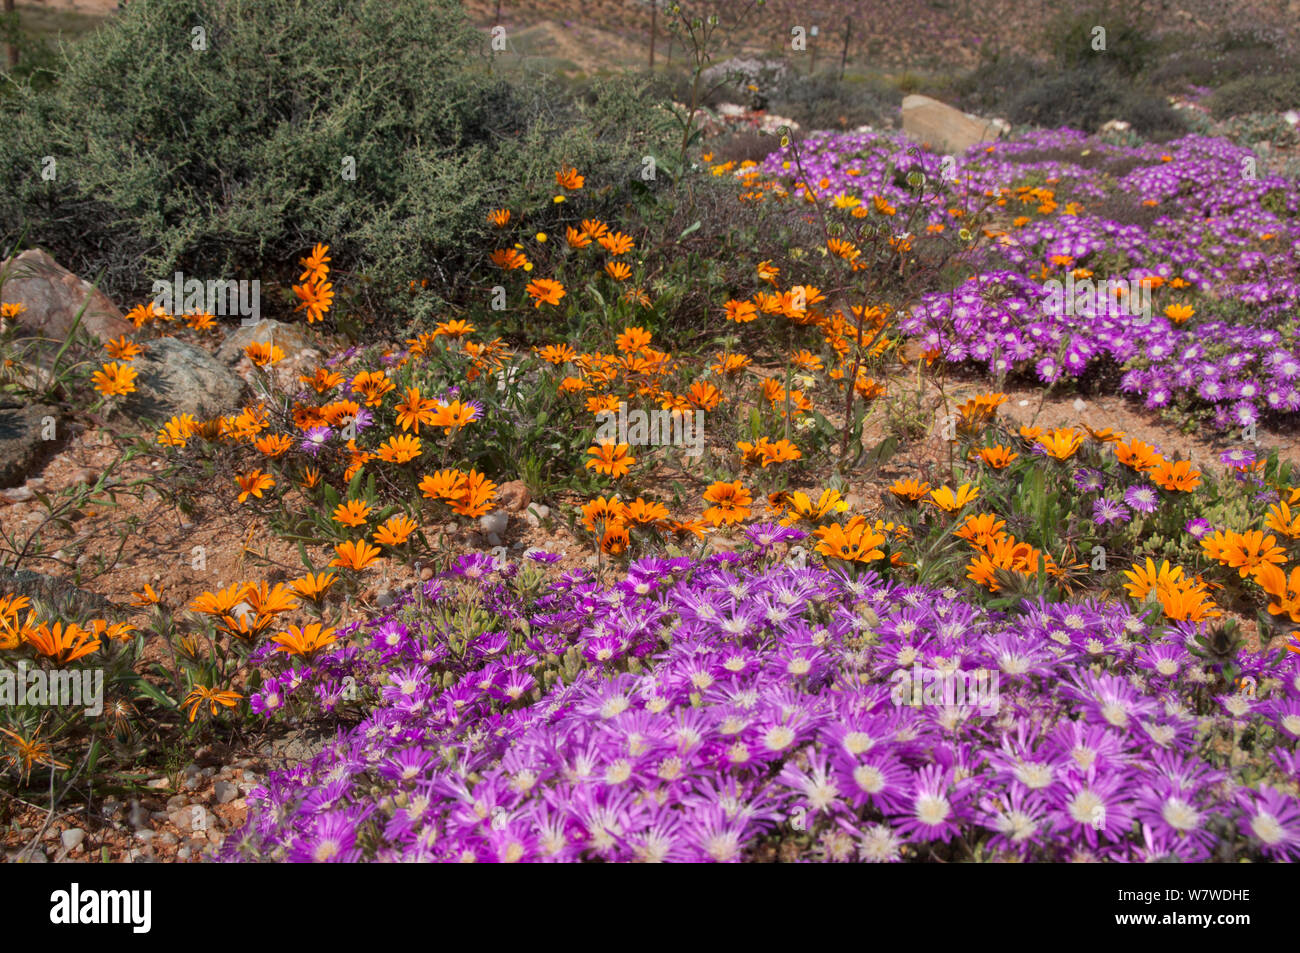 Beetle daisies (Drosanthemum hispidum) and Ice plants (Drosanthemum hispidum) in flower, near Okiep, Namaqualand, Northern Cape, South Africa, August. Stock Photo